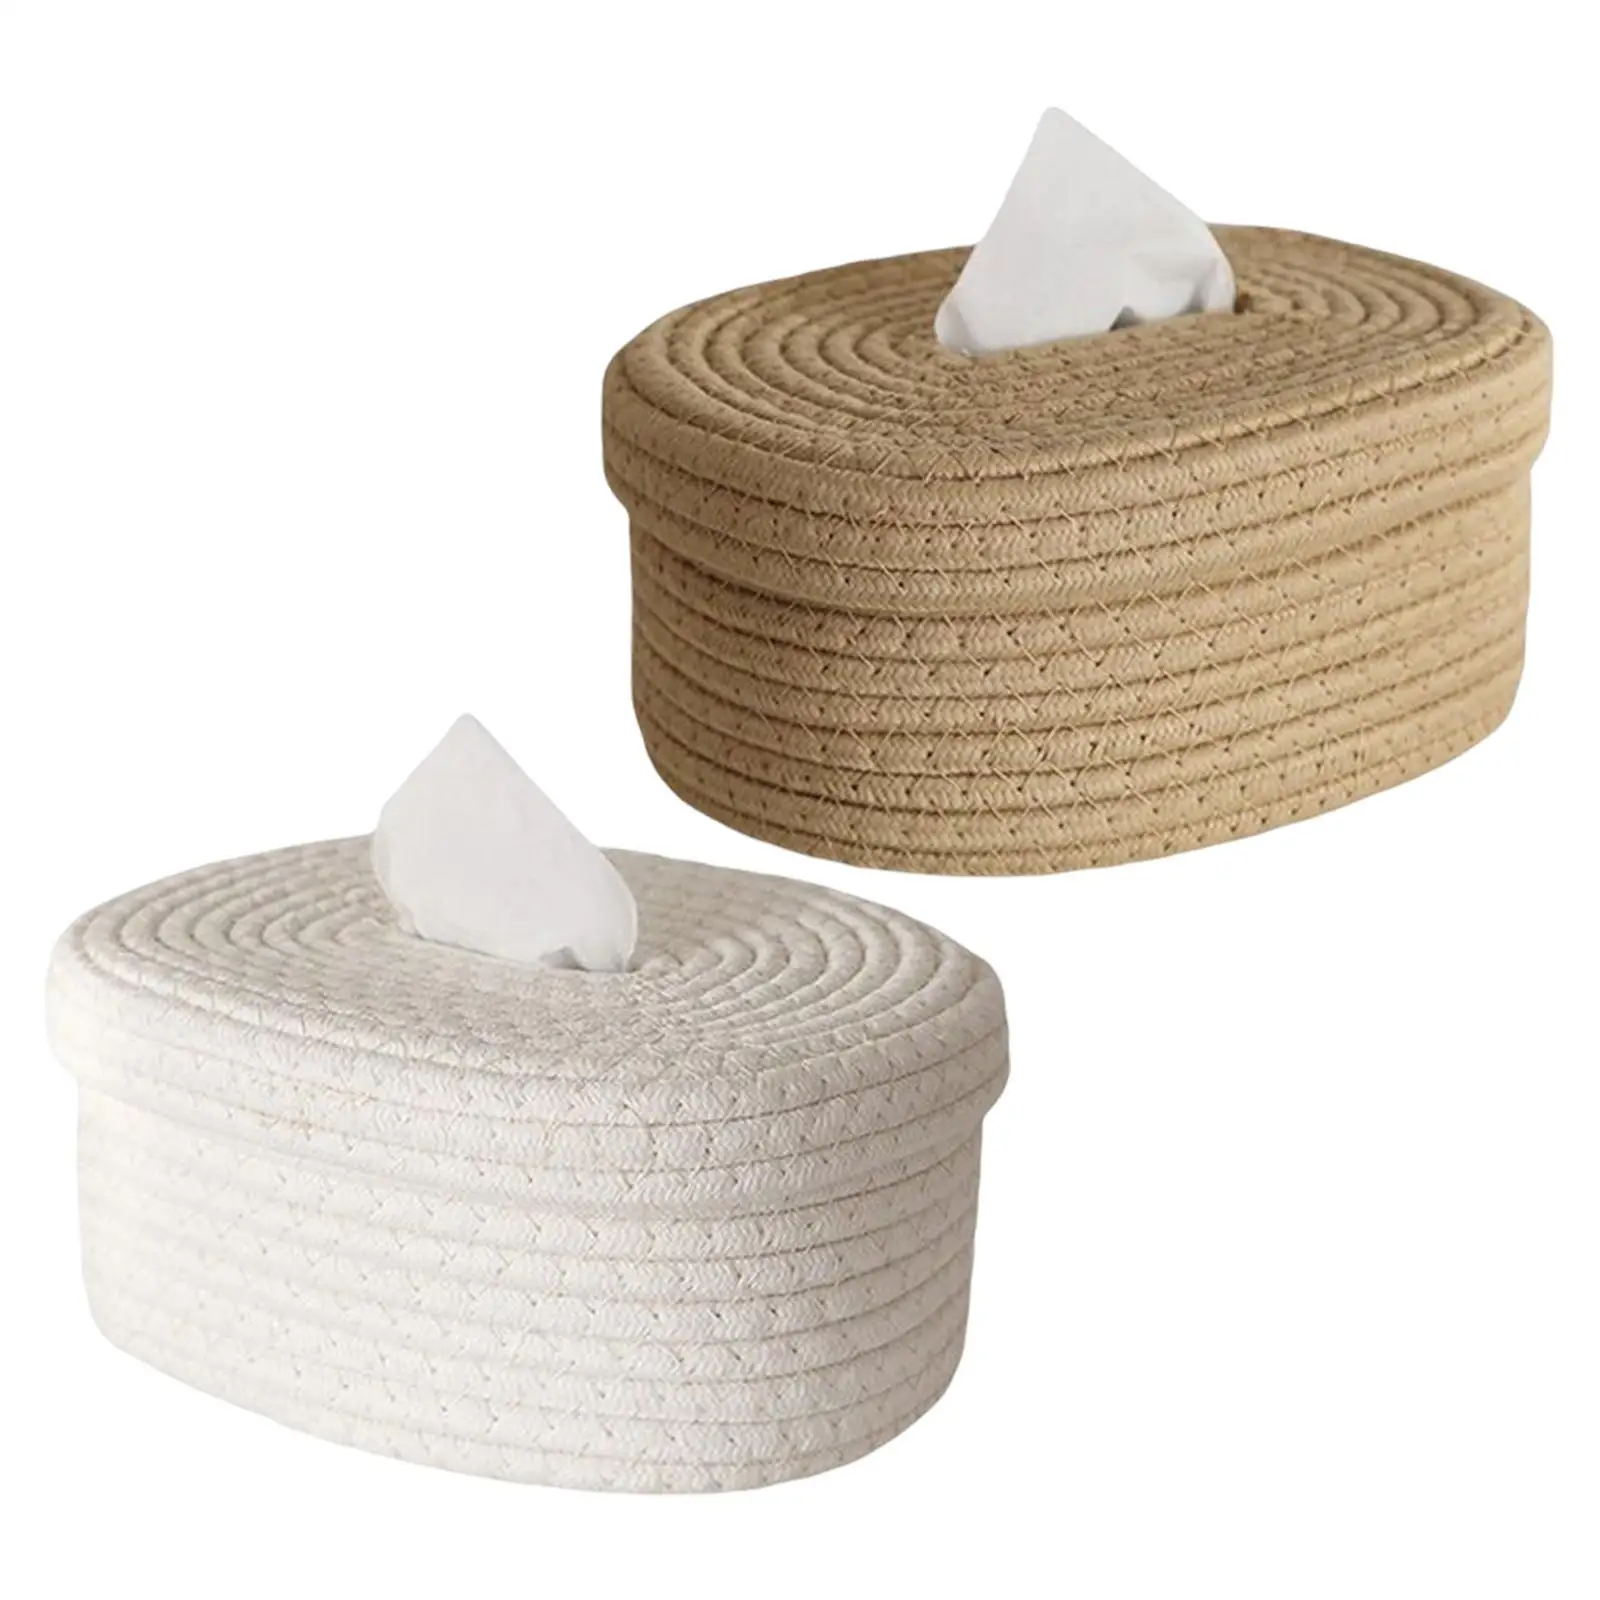 Oval  Rope Woven Napkin Tissues Holder Organizer for Dressing Table Party Picnic Sundries x16.5x10.5cm Indoors Outdoor